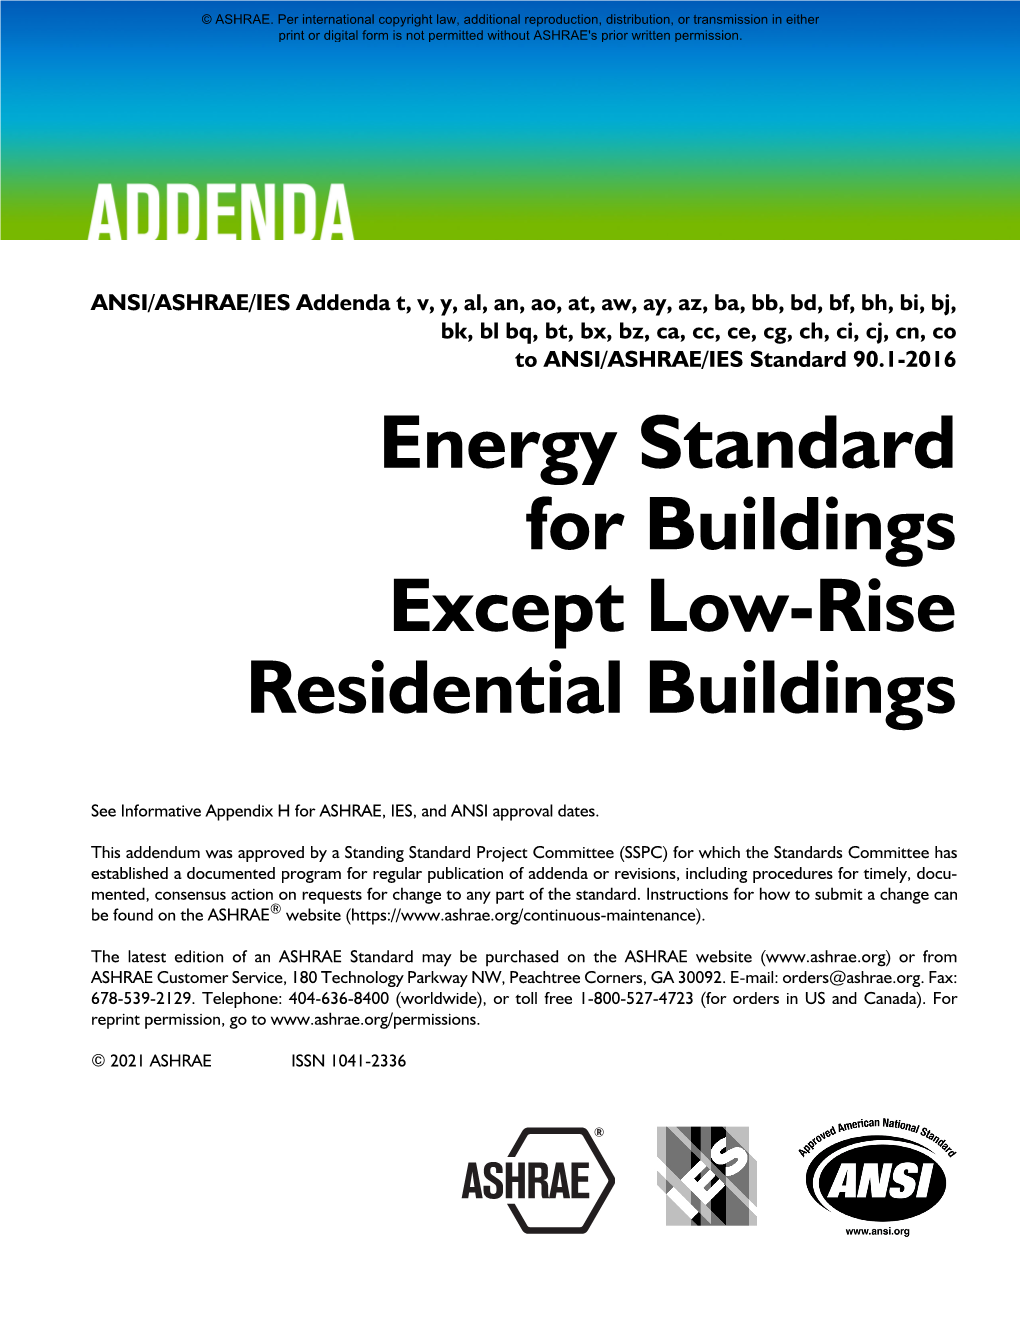 Standard 90.1-2016 Energy Standard for Buildings Except Low-Rise Residential Buildings